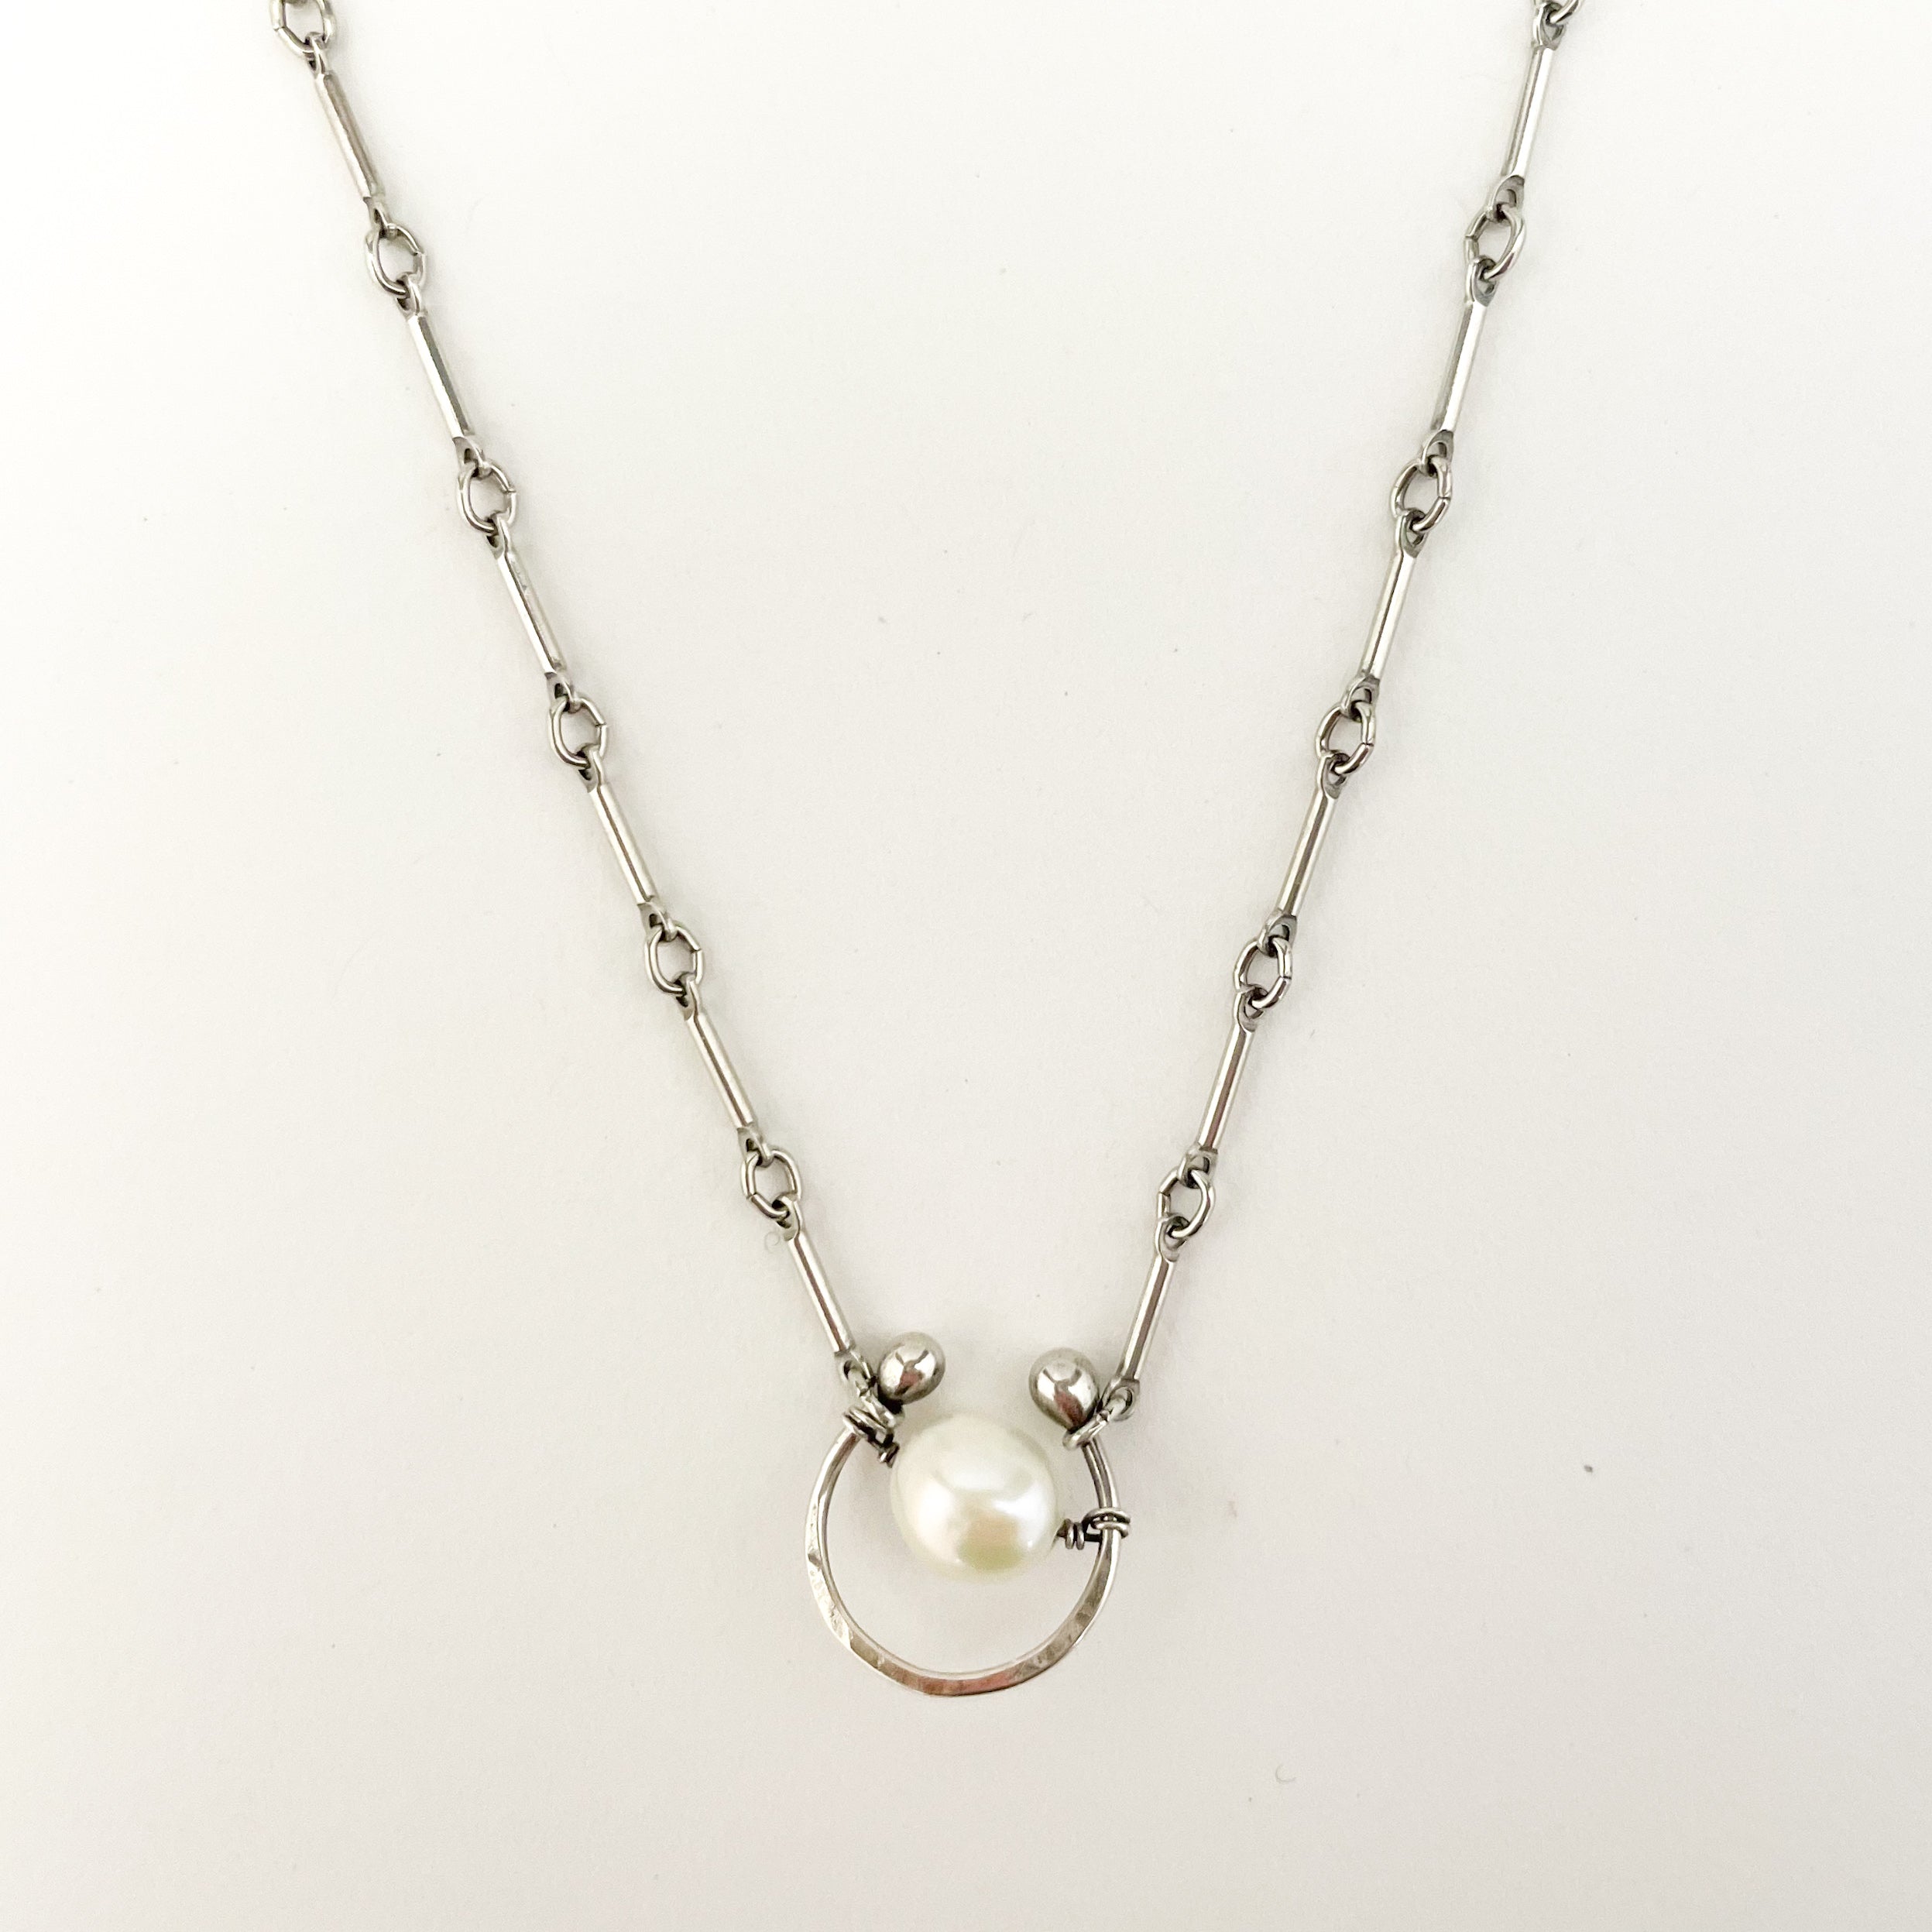 STERLING SILVER HORSESHOE NECKLACE- PEARL